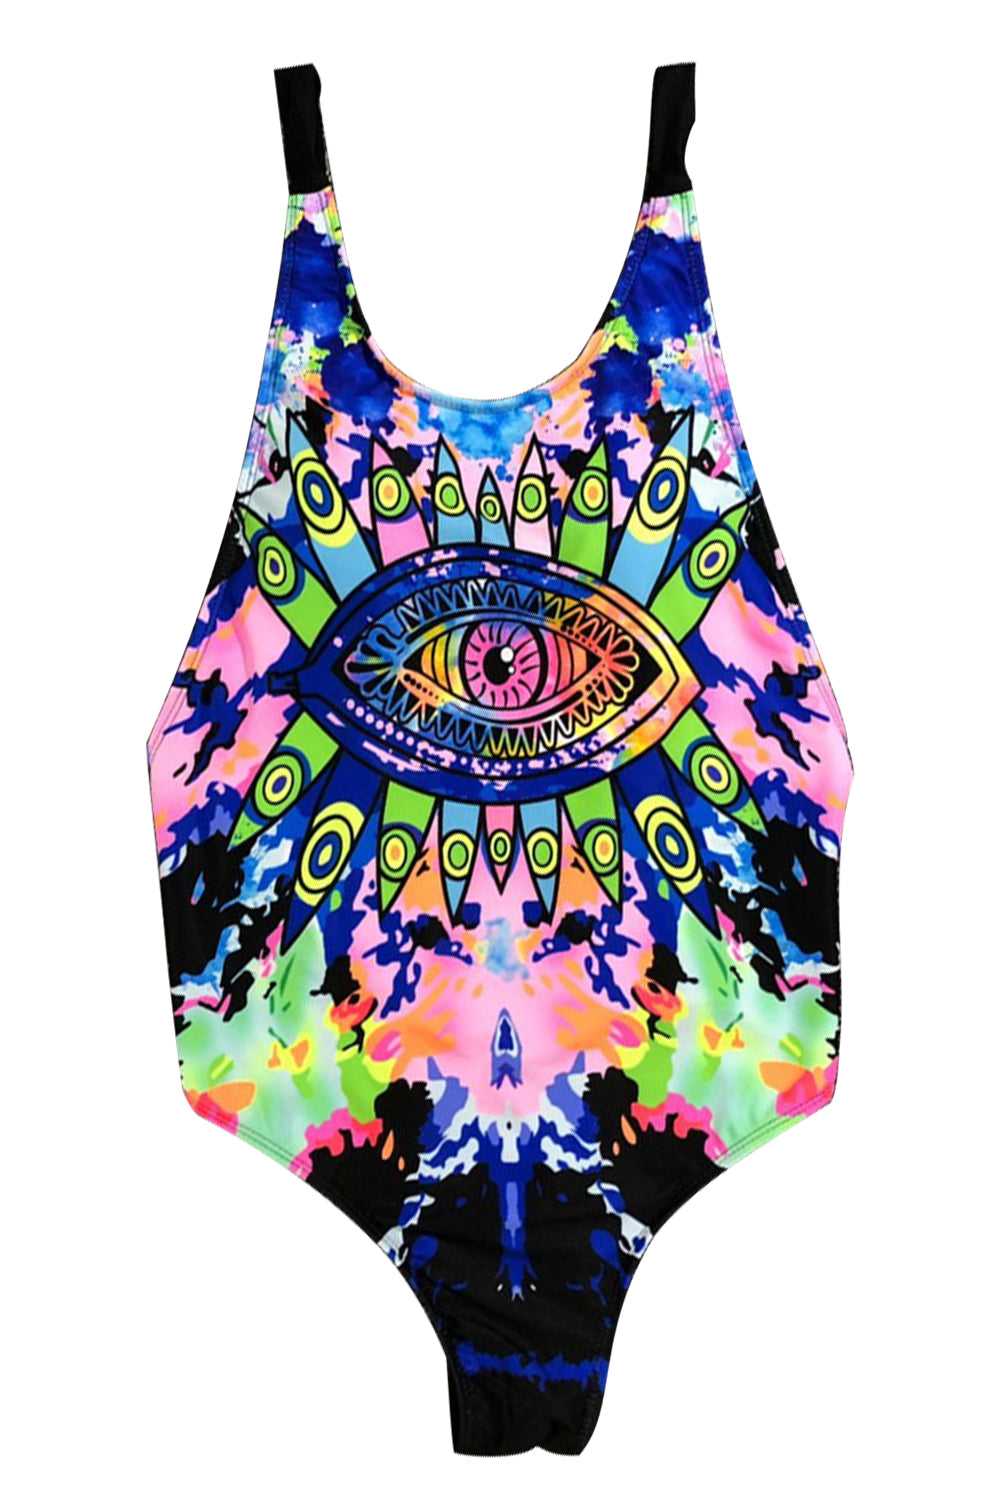 Iyasson Dazzling Doodle Print Backless One-piece Swimsuit